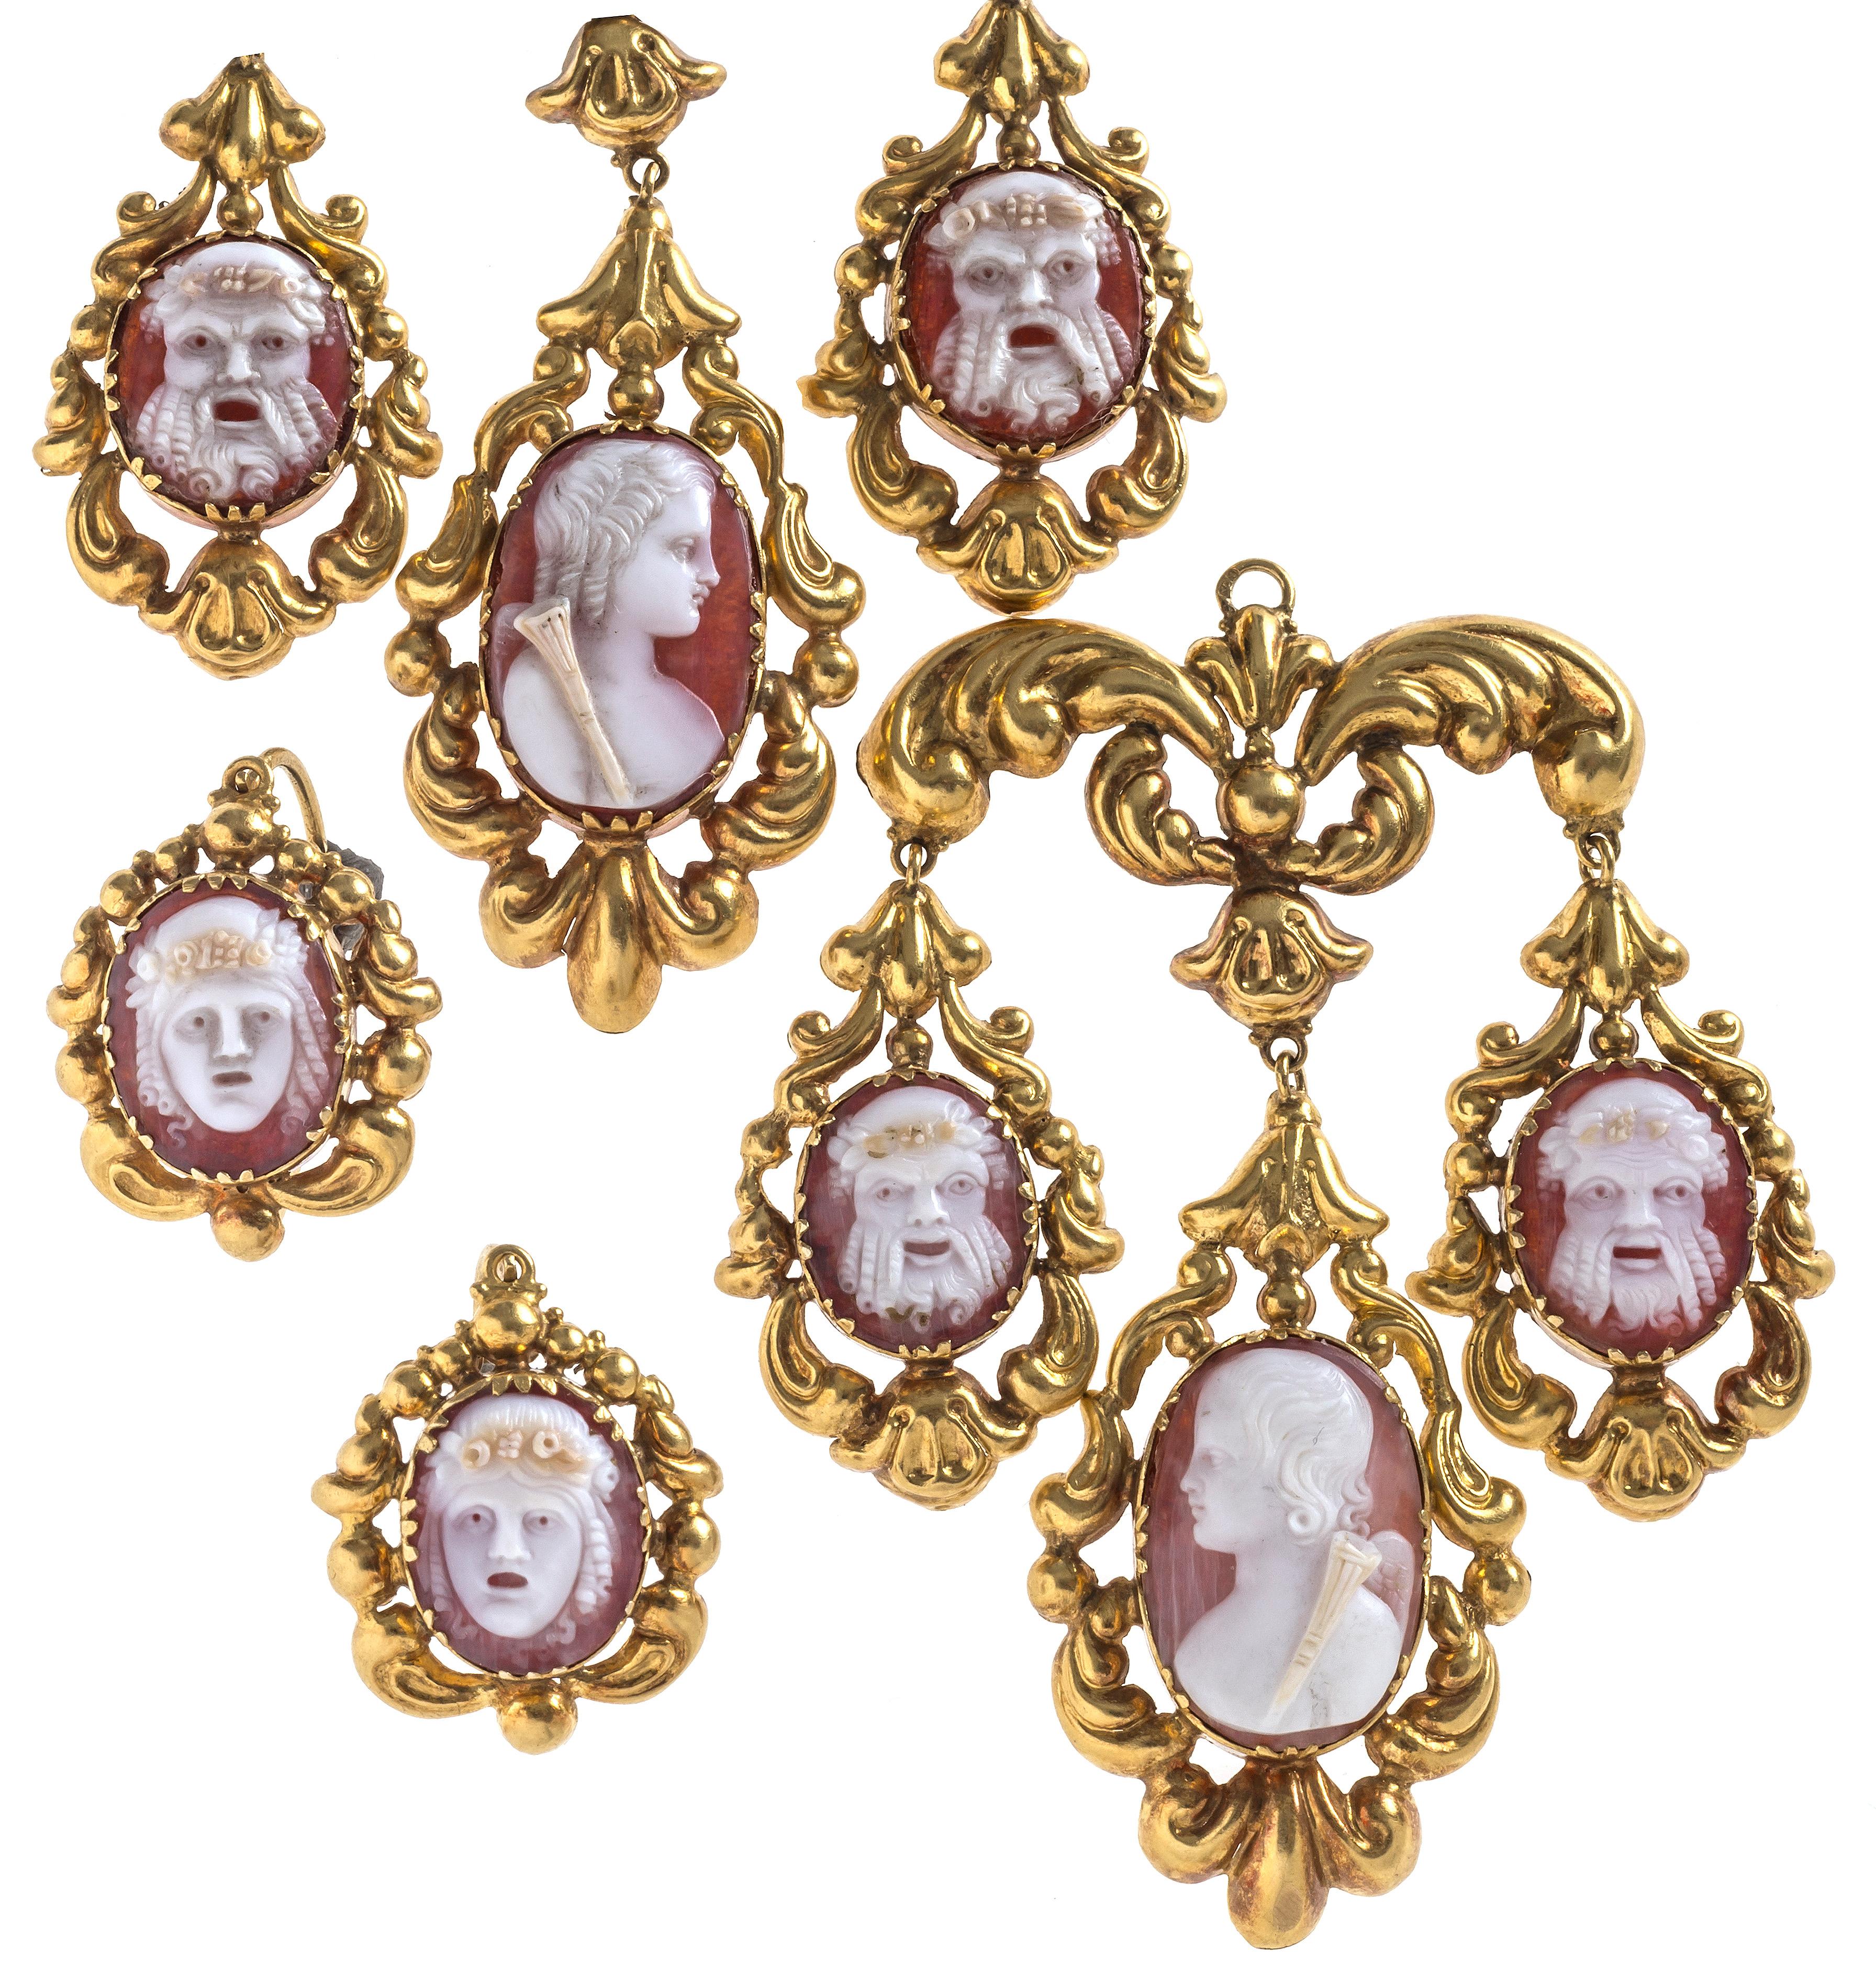 Fabulous chandelier earrings made of shell cameo with detachable tops. Each earring has one larger oval cameo depicting cupid in profile and three cameos showing greek and roman theatre masks. The tops have the original back to front hooks. The